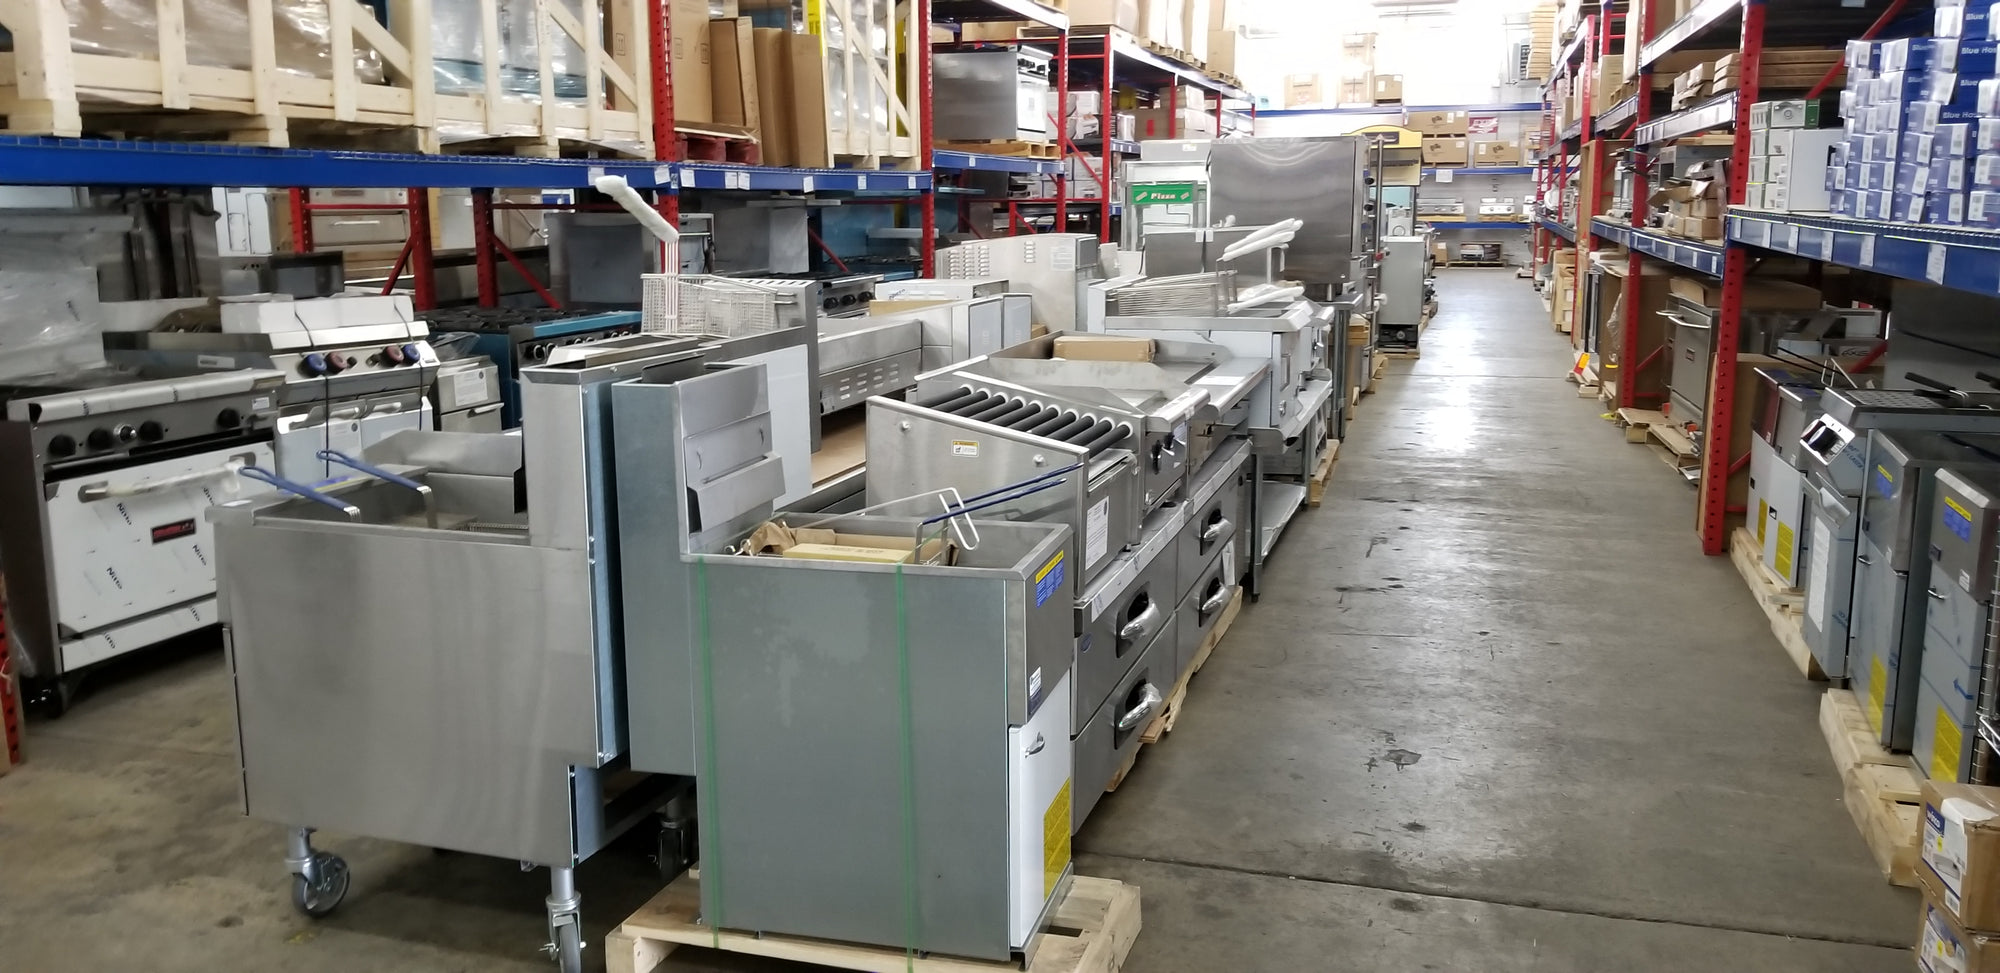 Fryers, Griddles, Charbroilers, and other Cooking Equipment from Pitco, Vulcan, Atosa, Star, Magikitchn, Garland/US Range, and more!